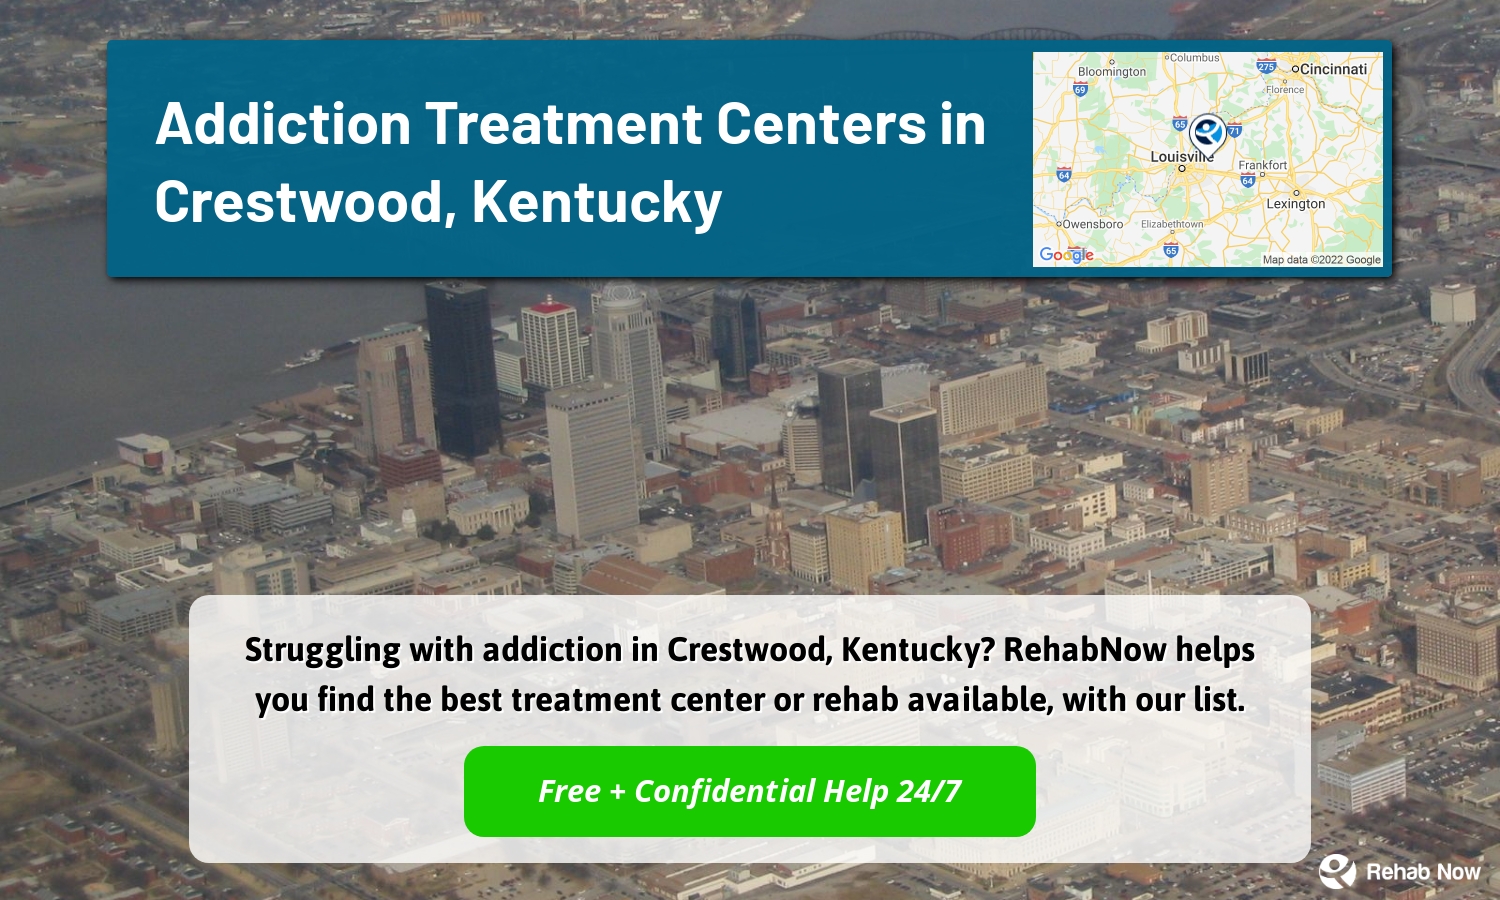 Struggling with addiction in Crestwood, Kentucky? RehabNow helps you find the best treatment center or rehab available, with our list.